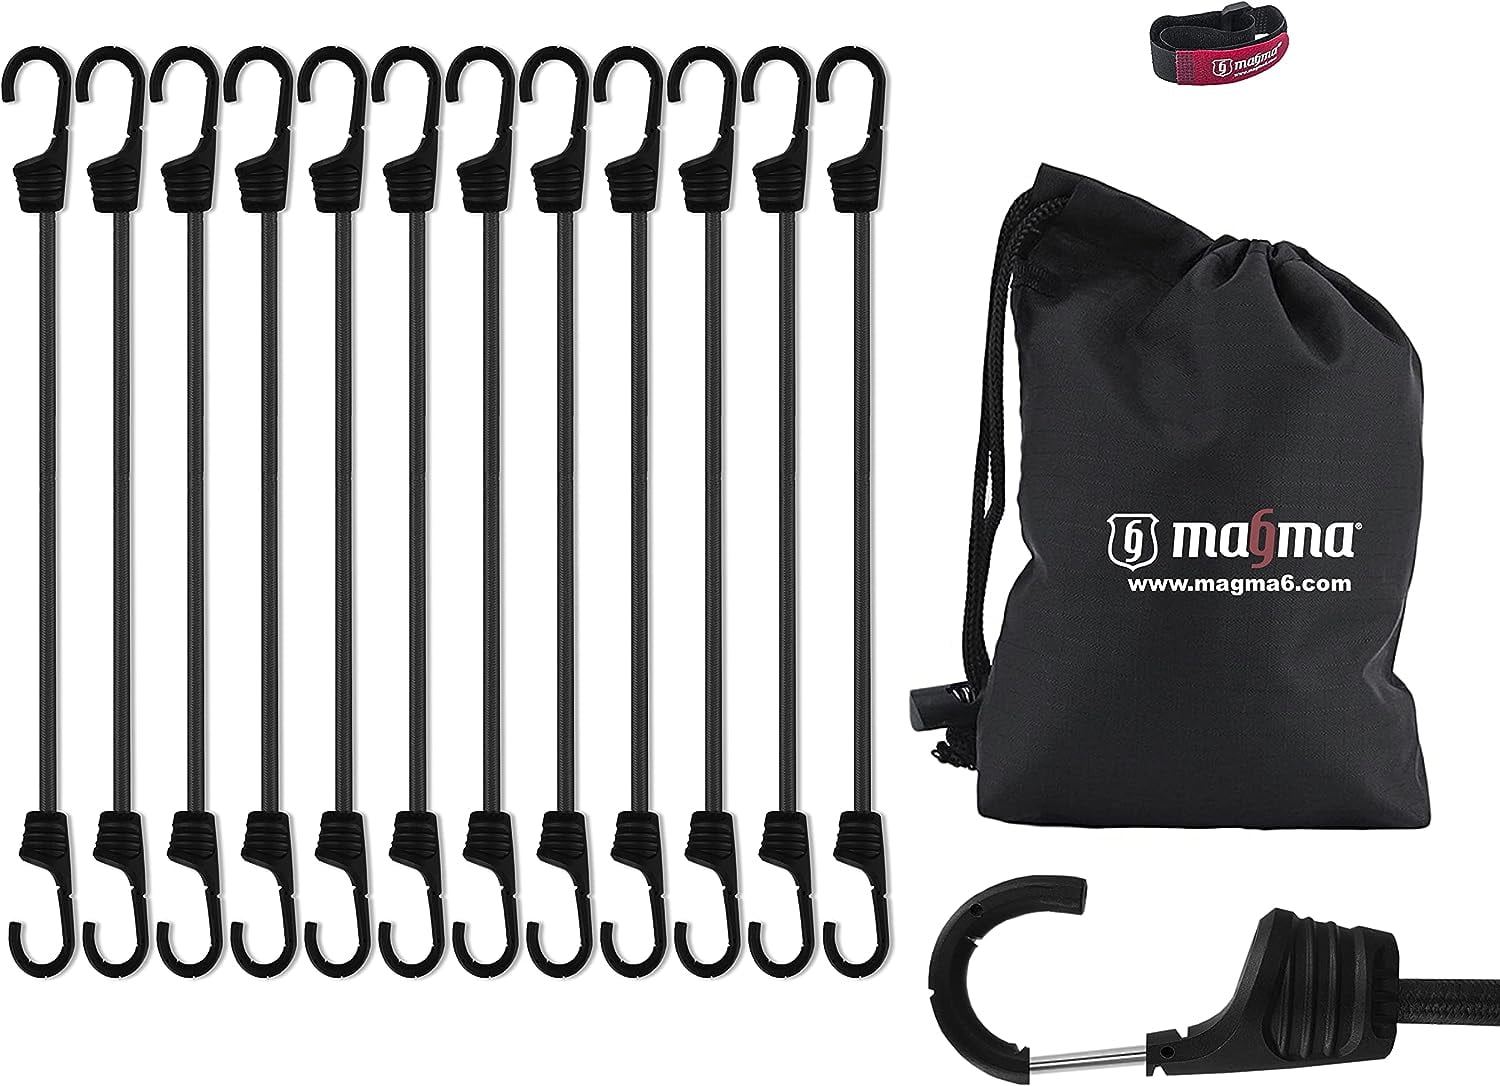 MAGMA 12 Bungee Cords Pack 1ft Max. Strength 153lbs Heavy Duty Elastic Cord Black